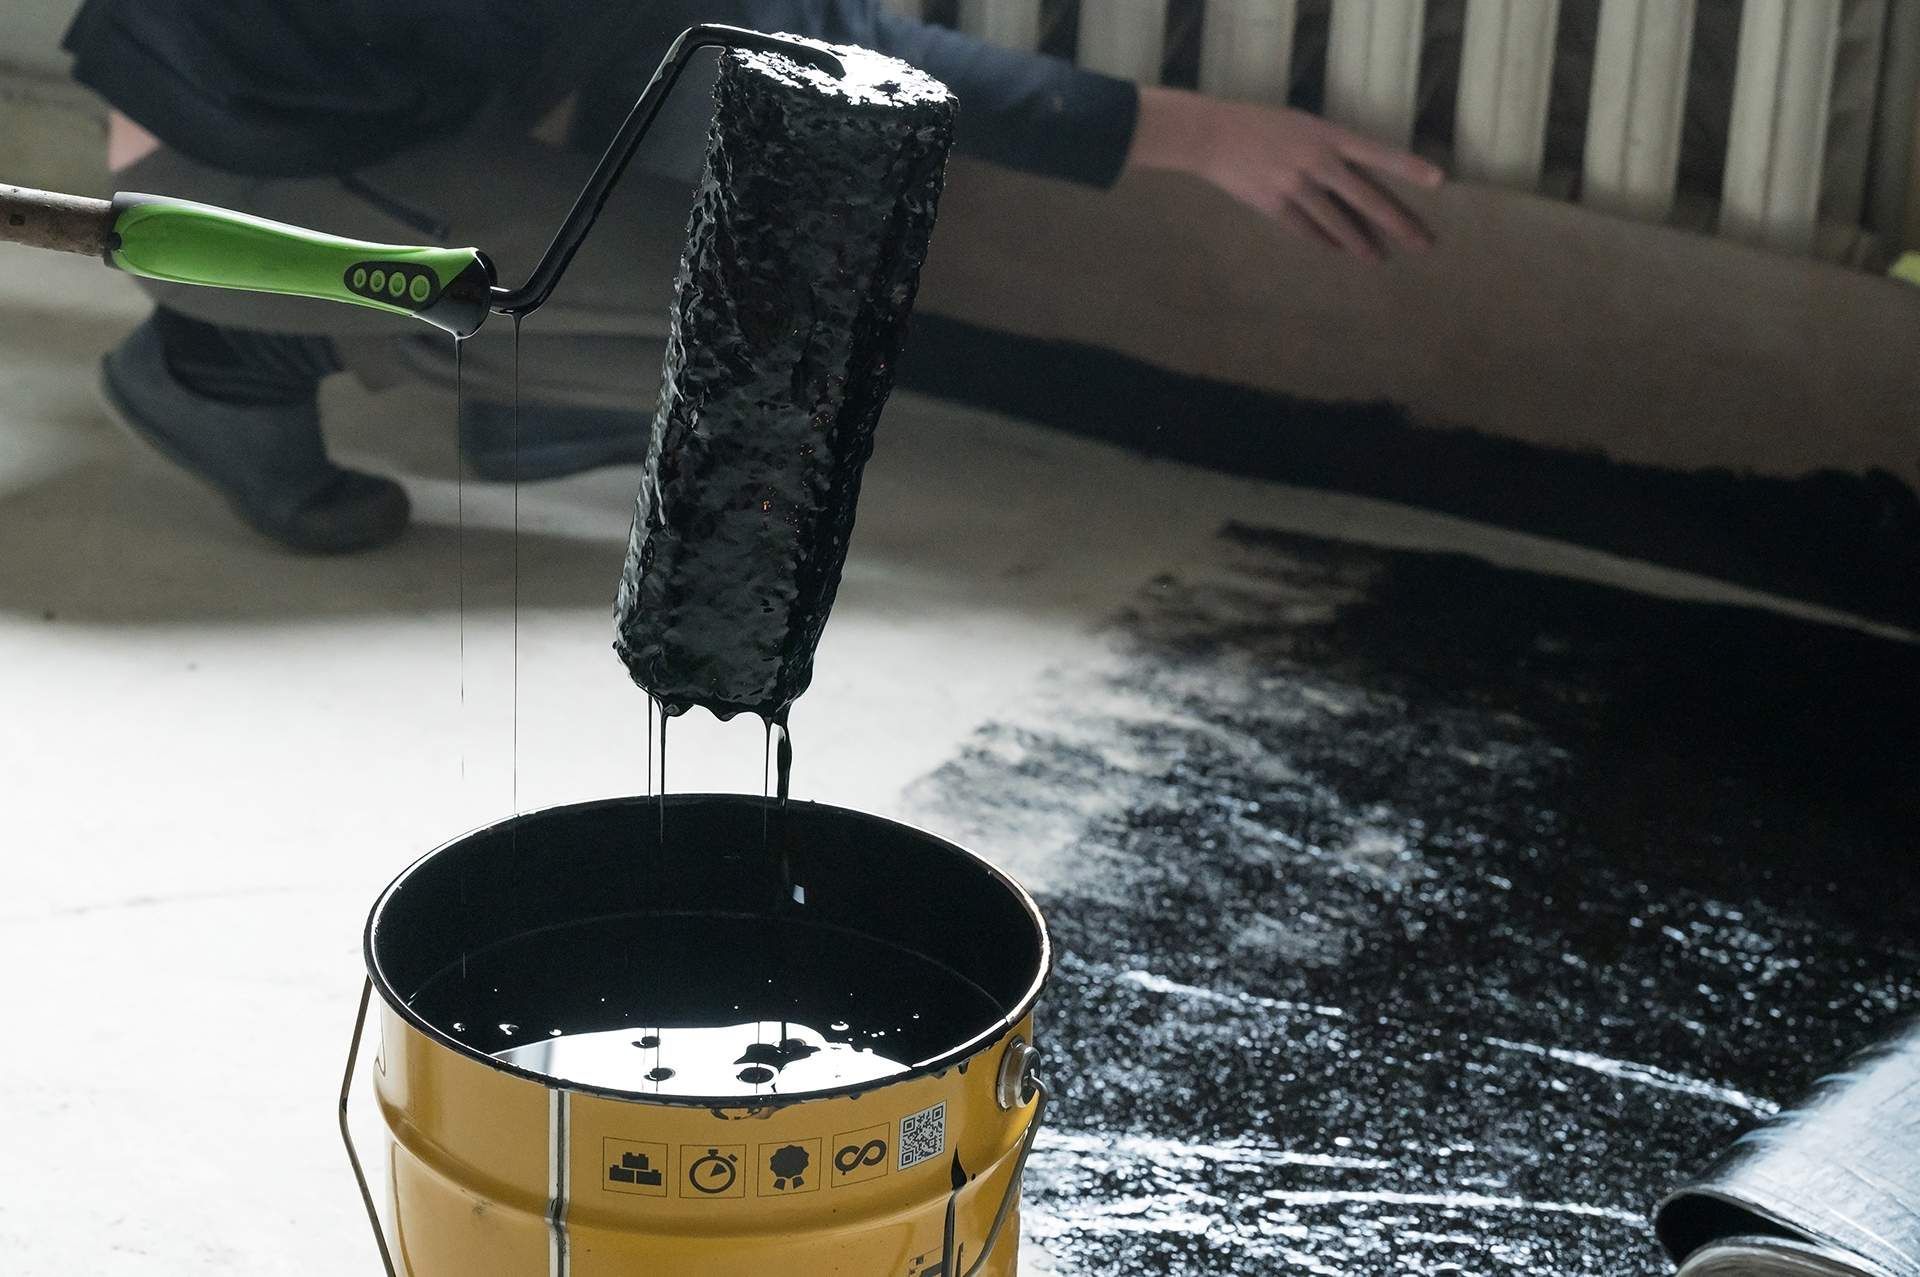 Applying hot resin to the floor for waterproofing, roller and bucket of resin, black and liquid resin